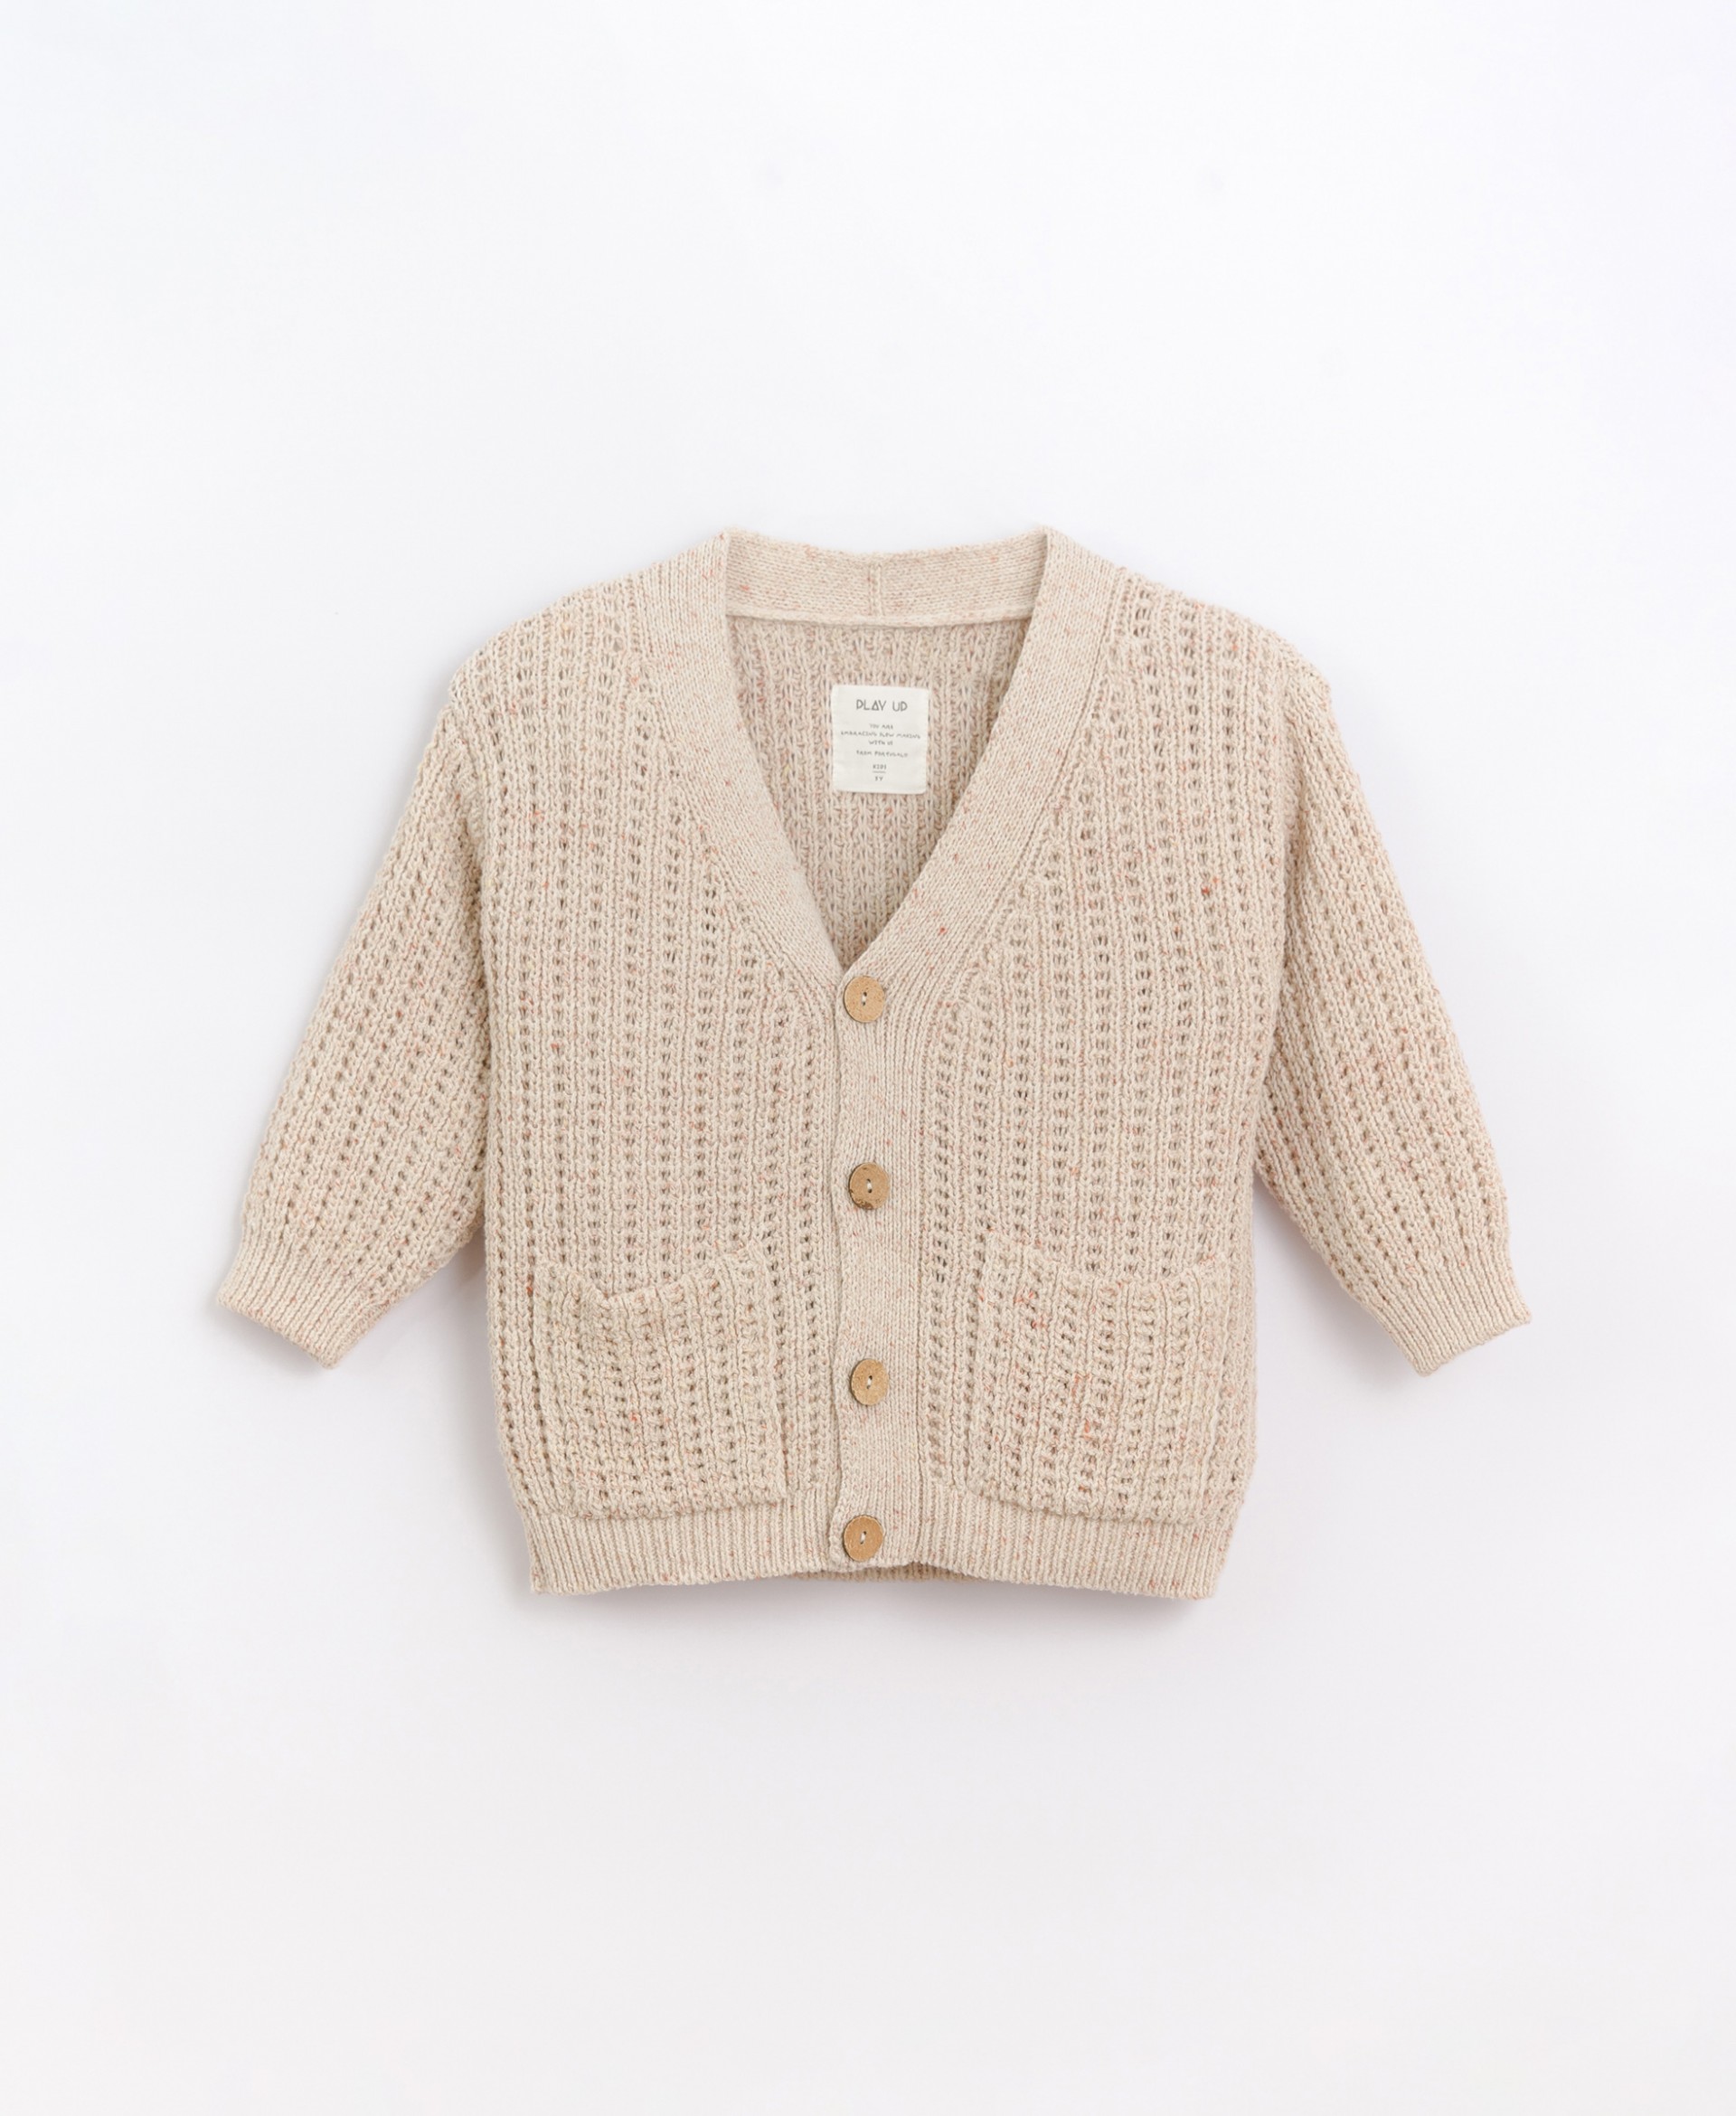 Knit jacket with button holes | Basketry